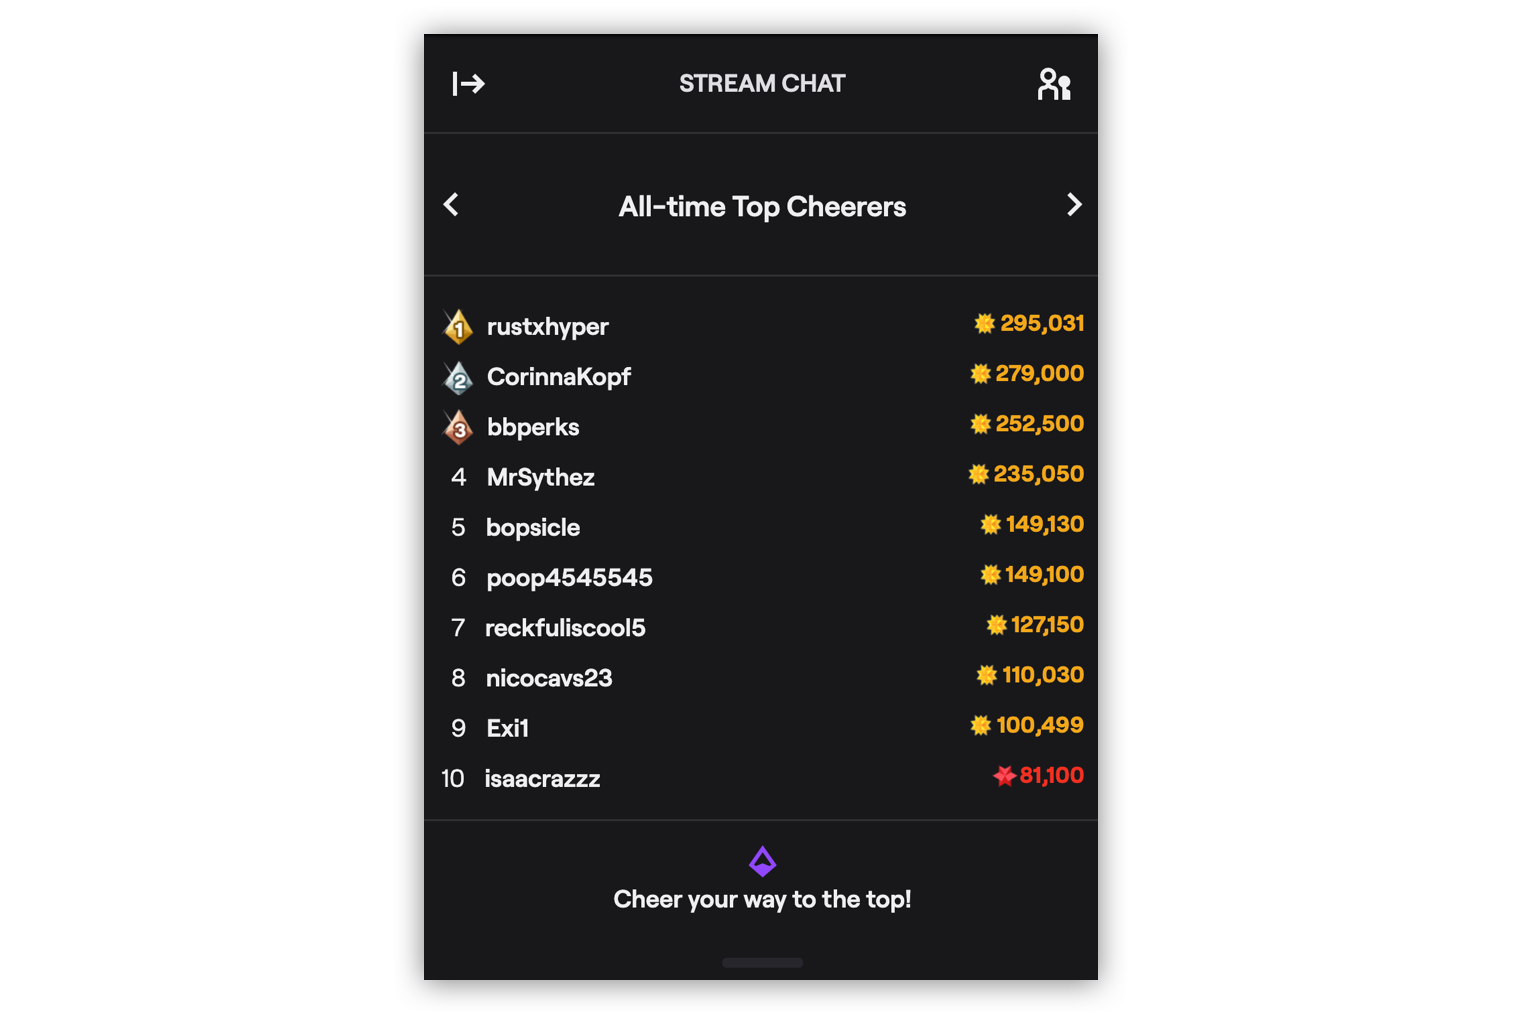 Twitch users listed and rewarded for high participation